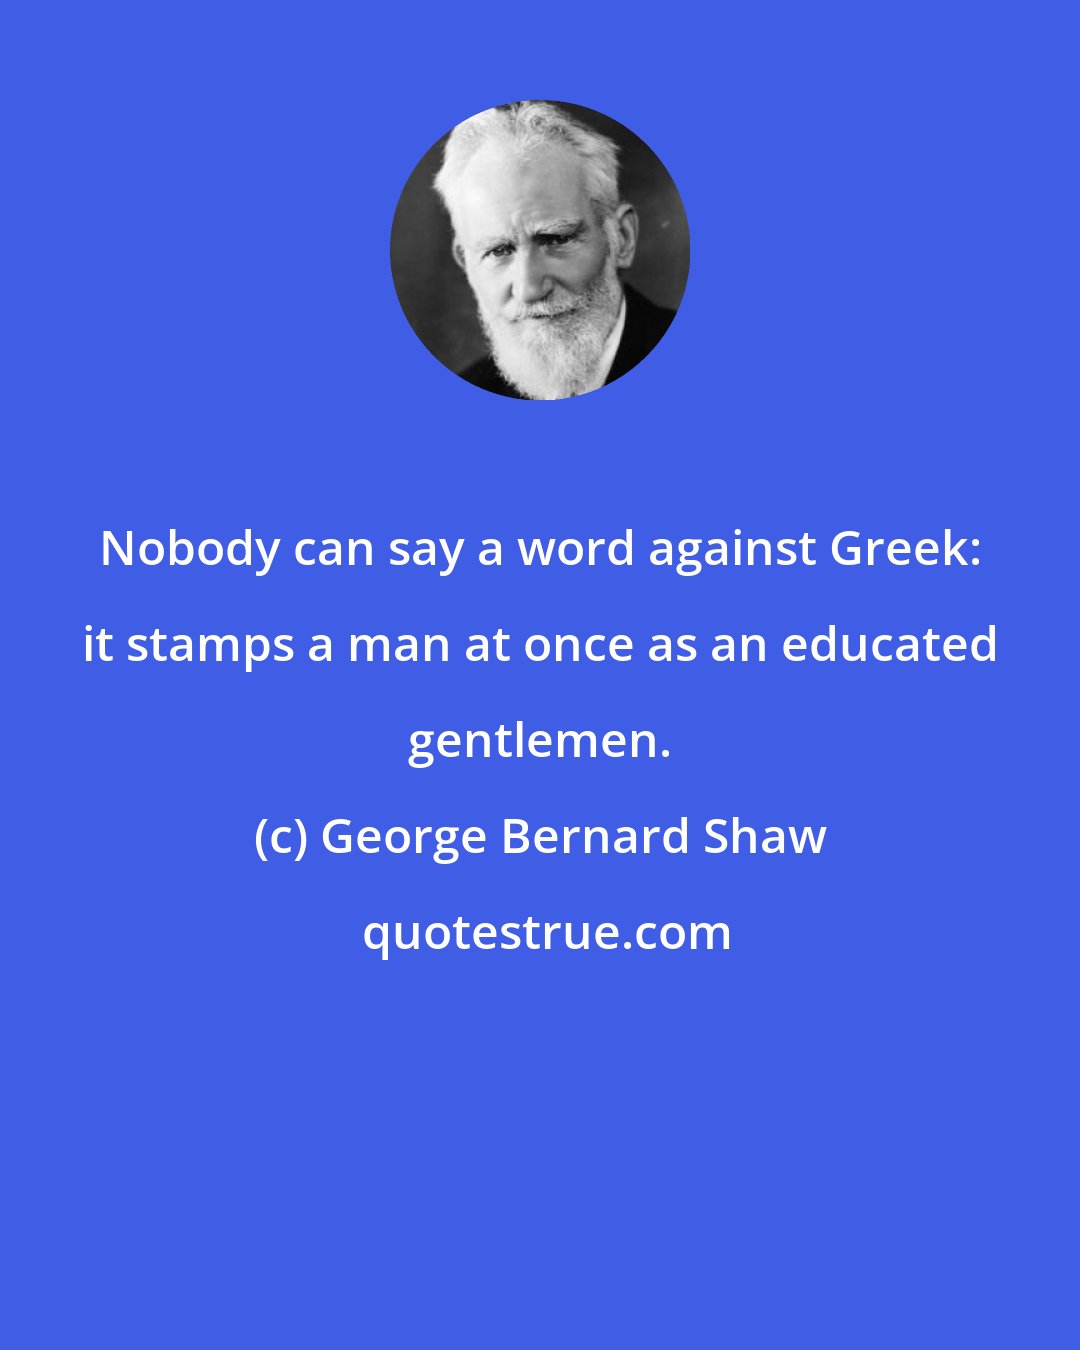 George Bernard Shaw: Nobody can say a word against Greek: it stamps a man at once as an educated gentlemen.